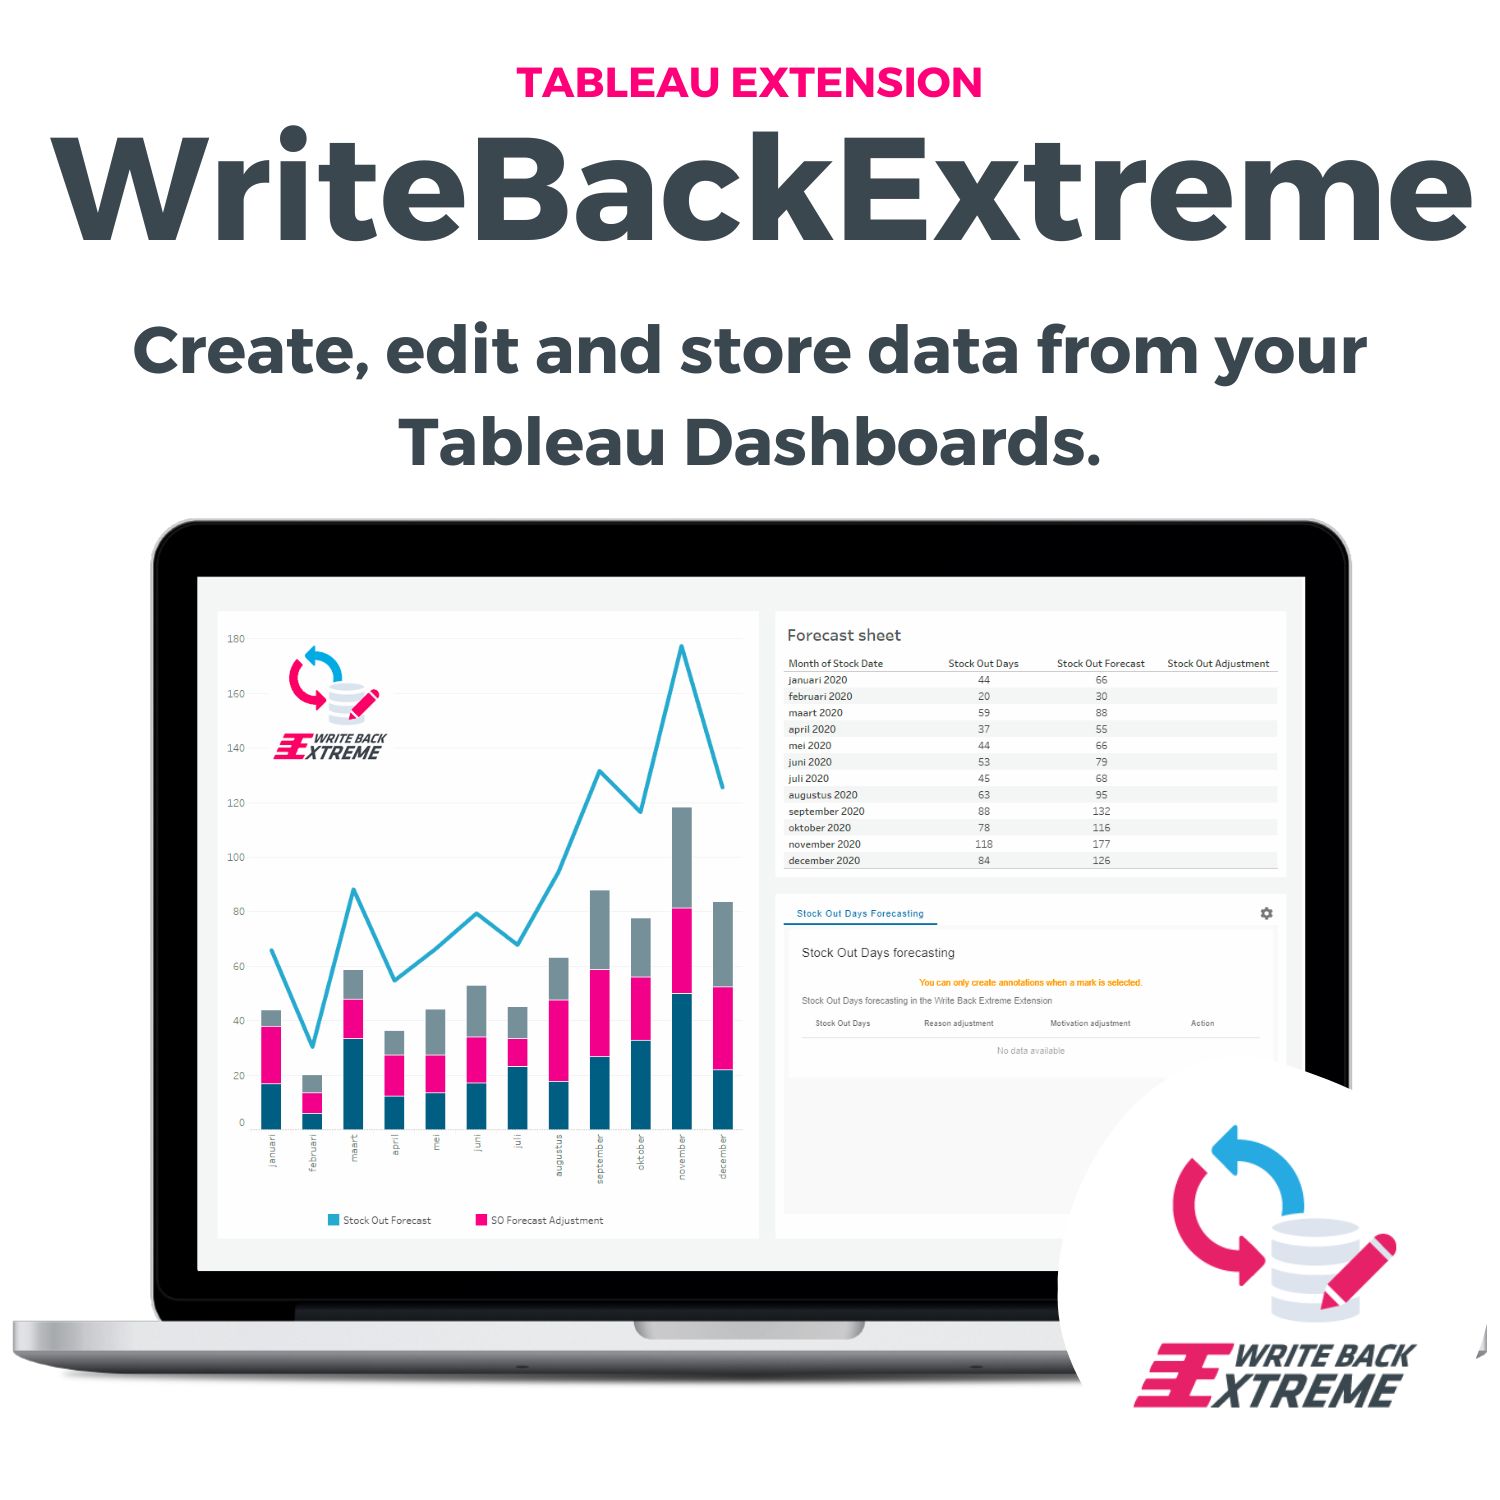 WriteBackExtreme - The ultimate write-back Extension for Tableau